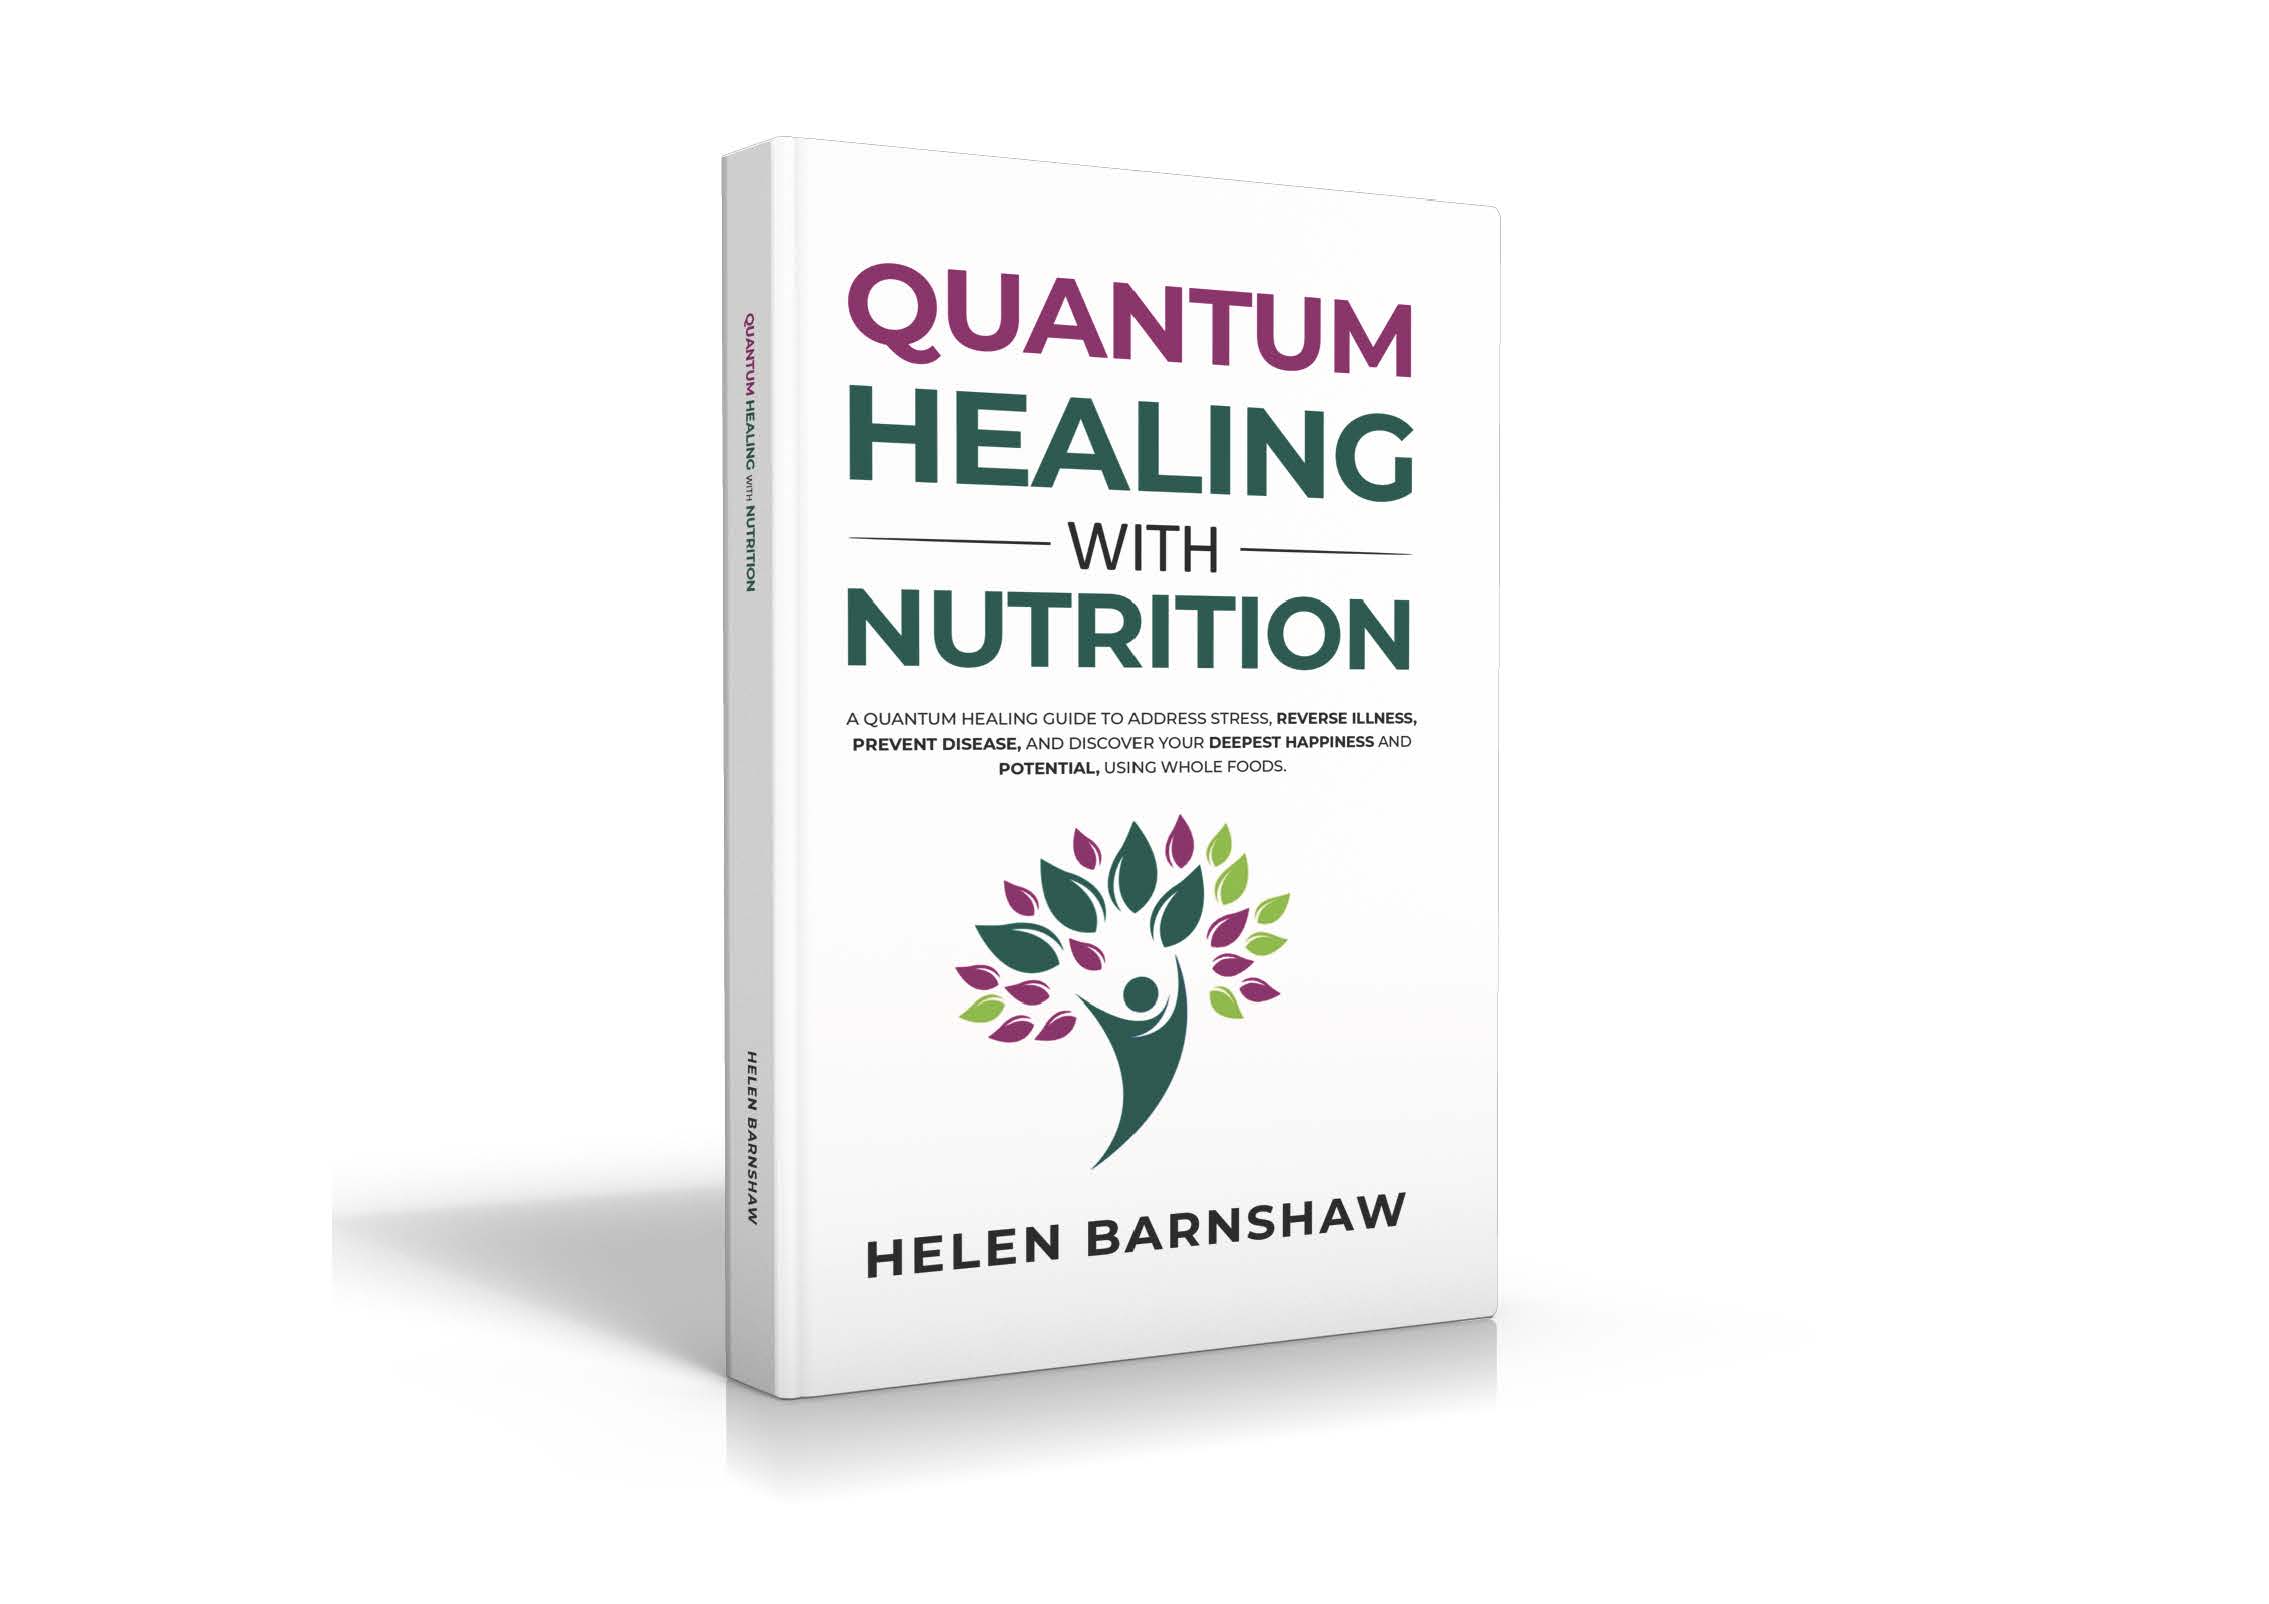 Book published this March 2021: Quantum Healing with Nutrition